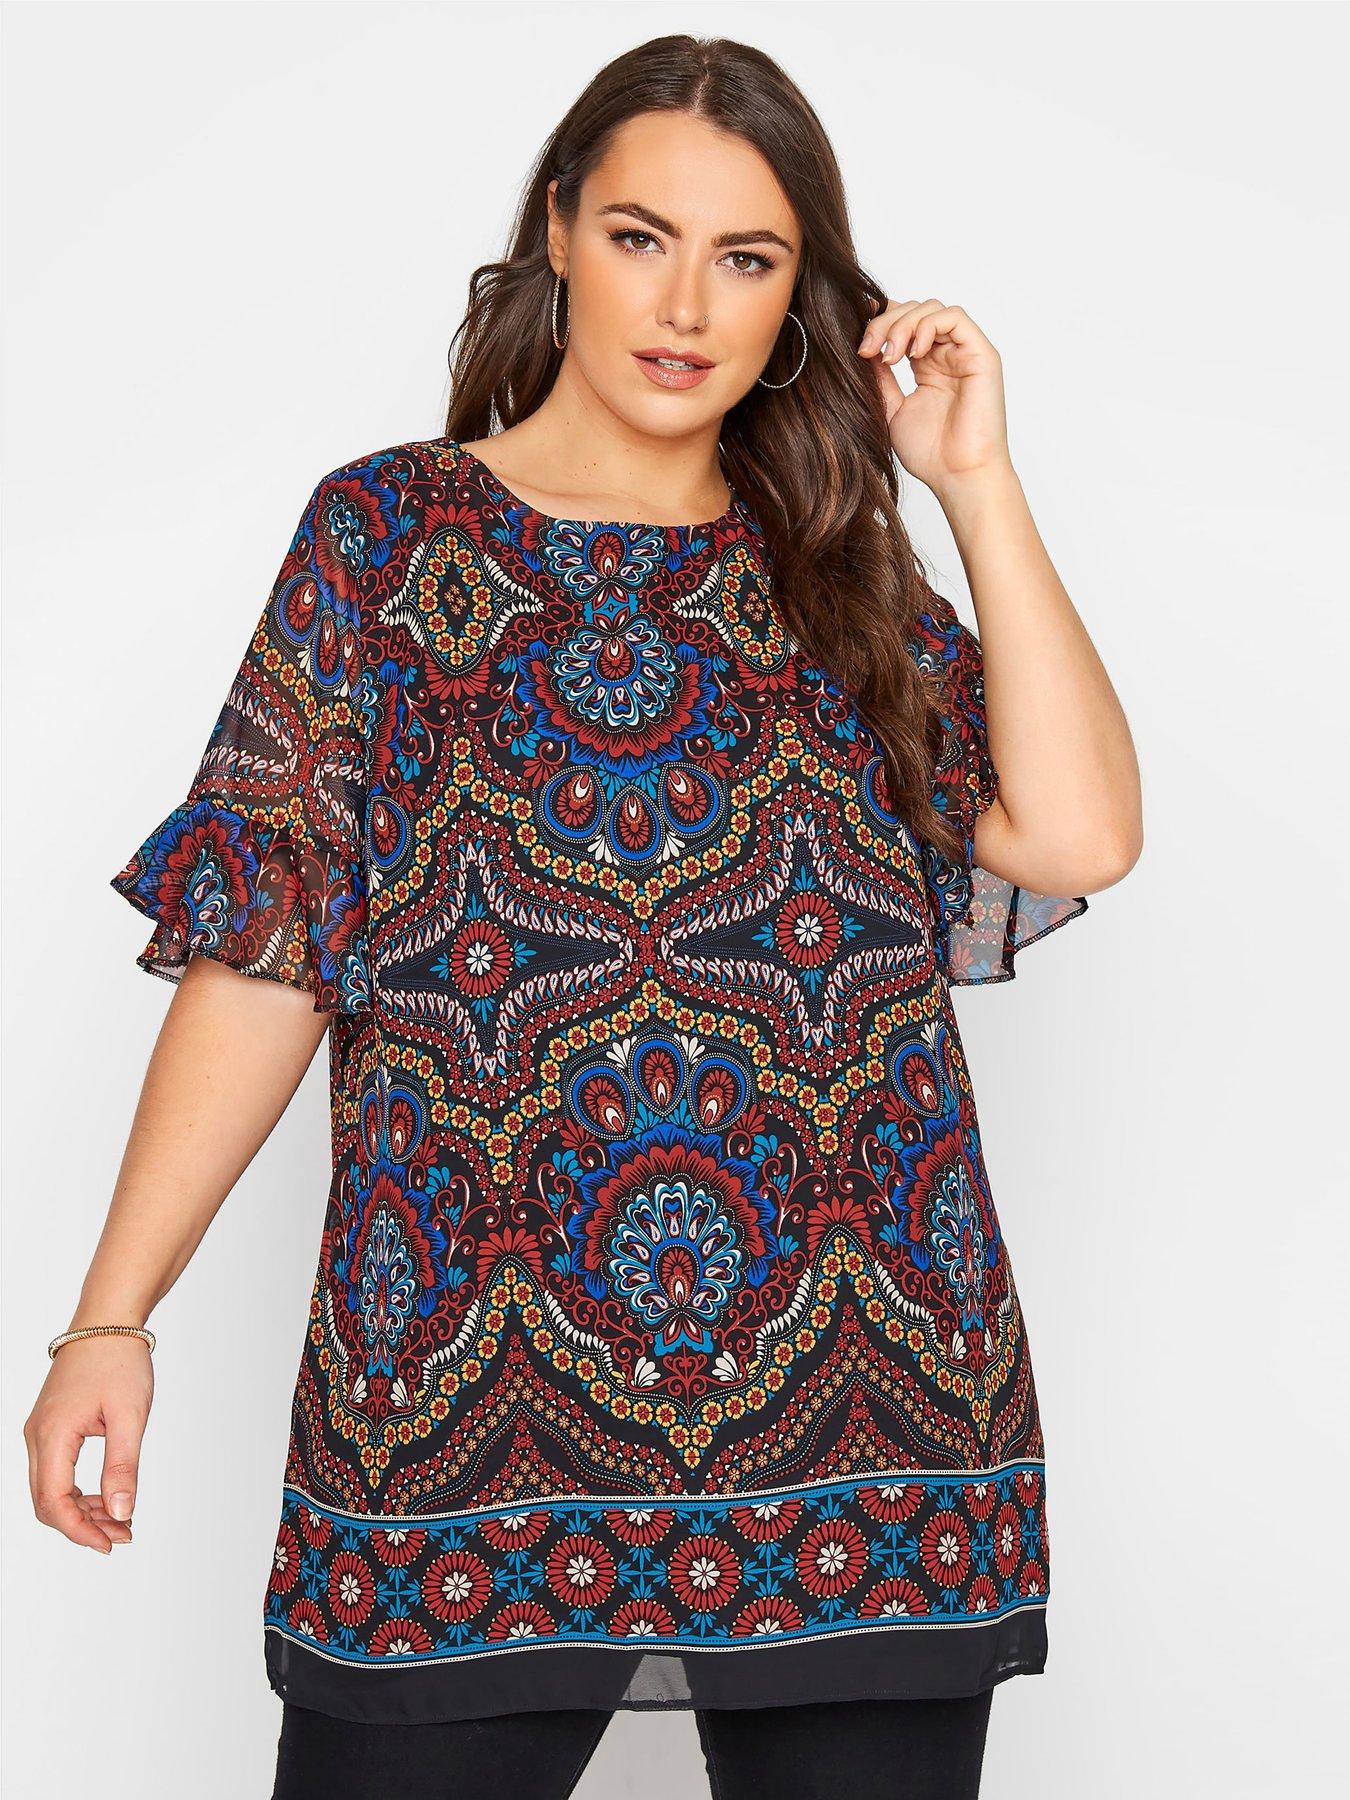 Women tunic top with frill Sleeve Black Blue Paisley